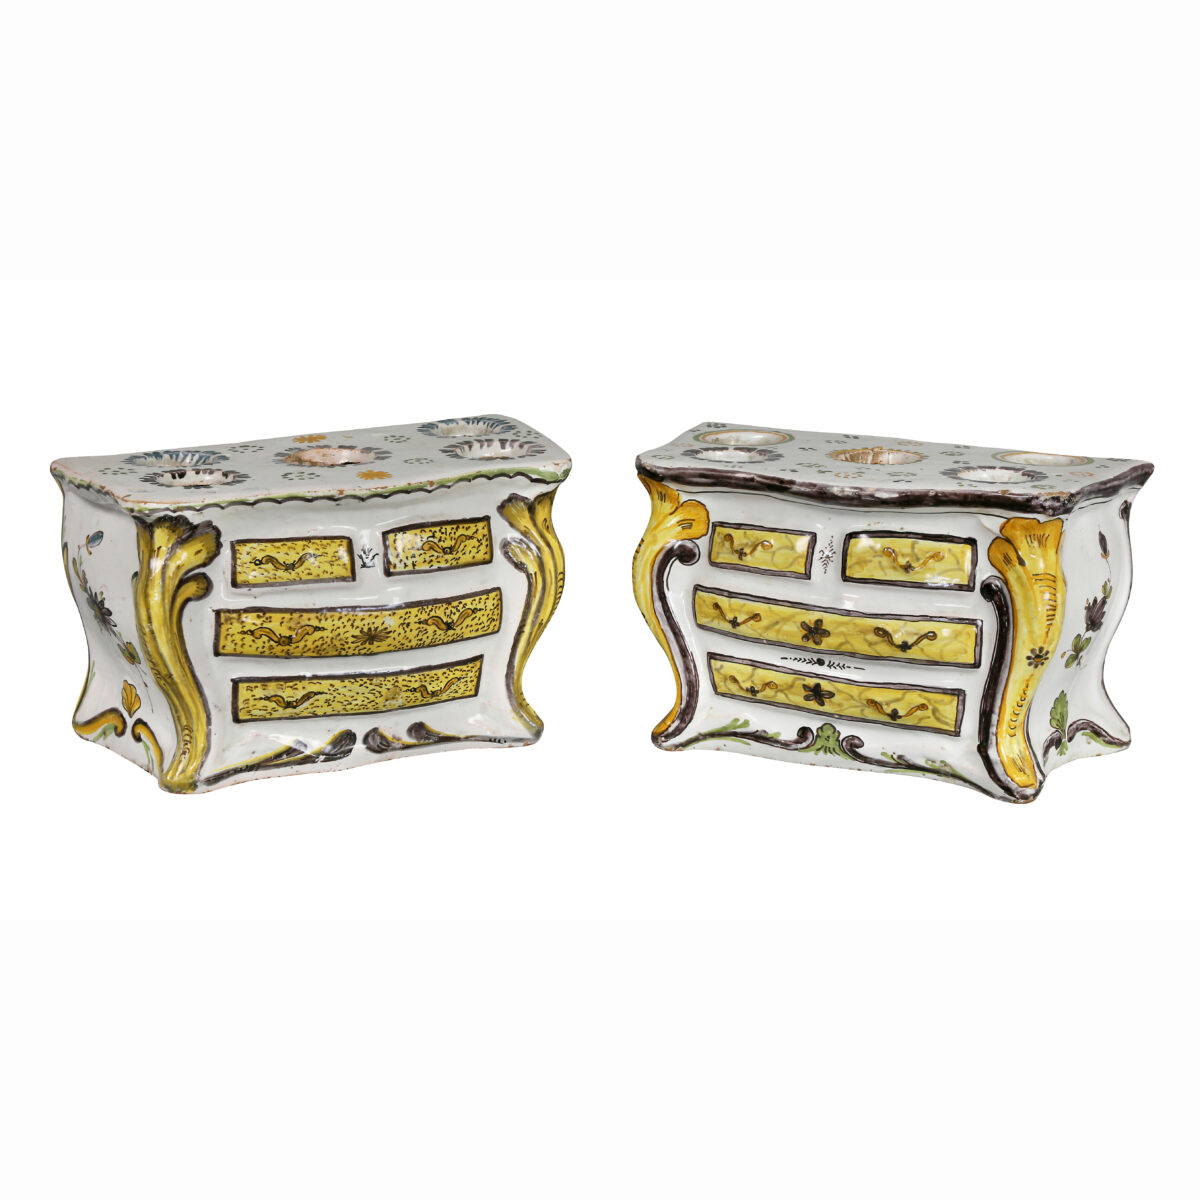 Pair of French Faience Bough Pots in the Form of Commodes